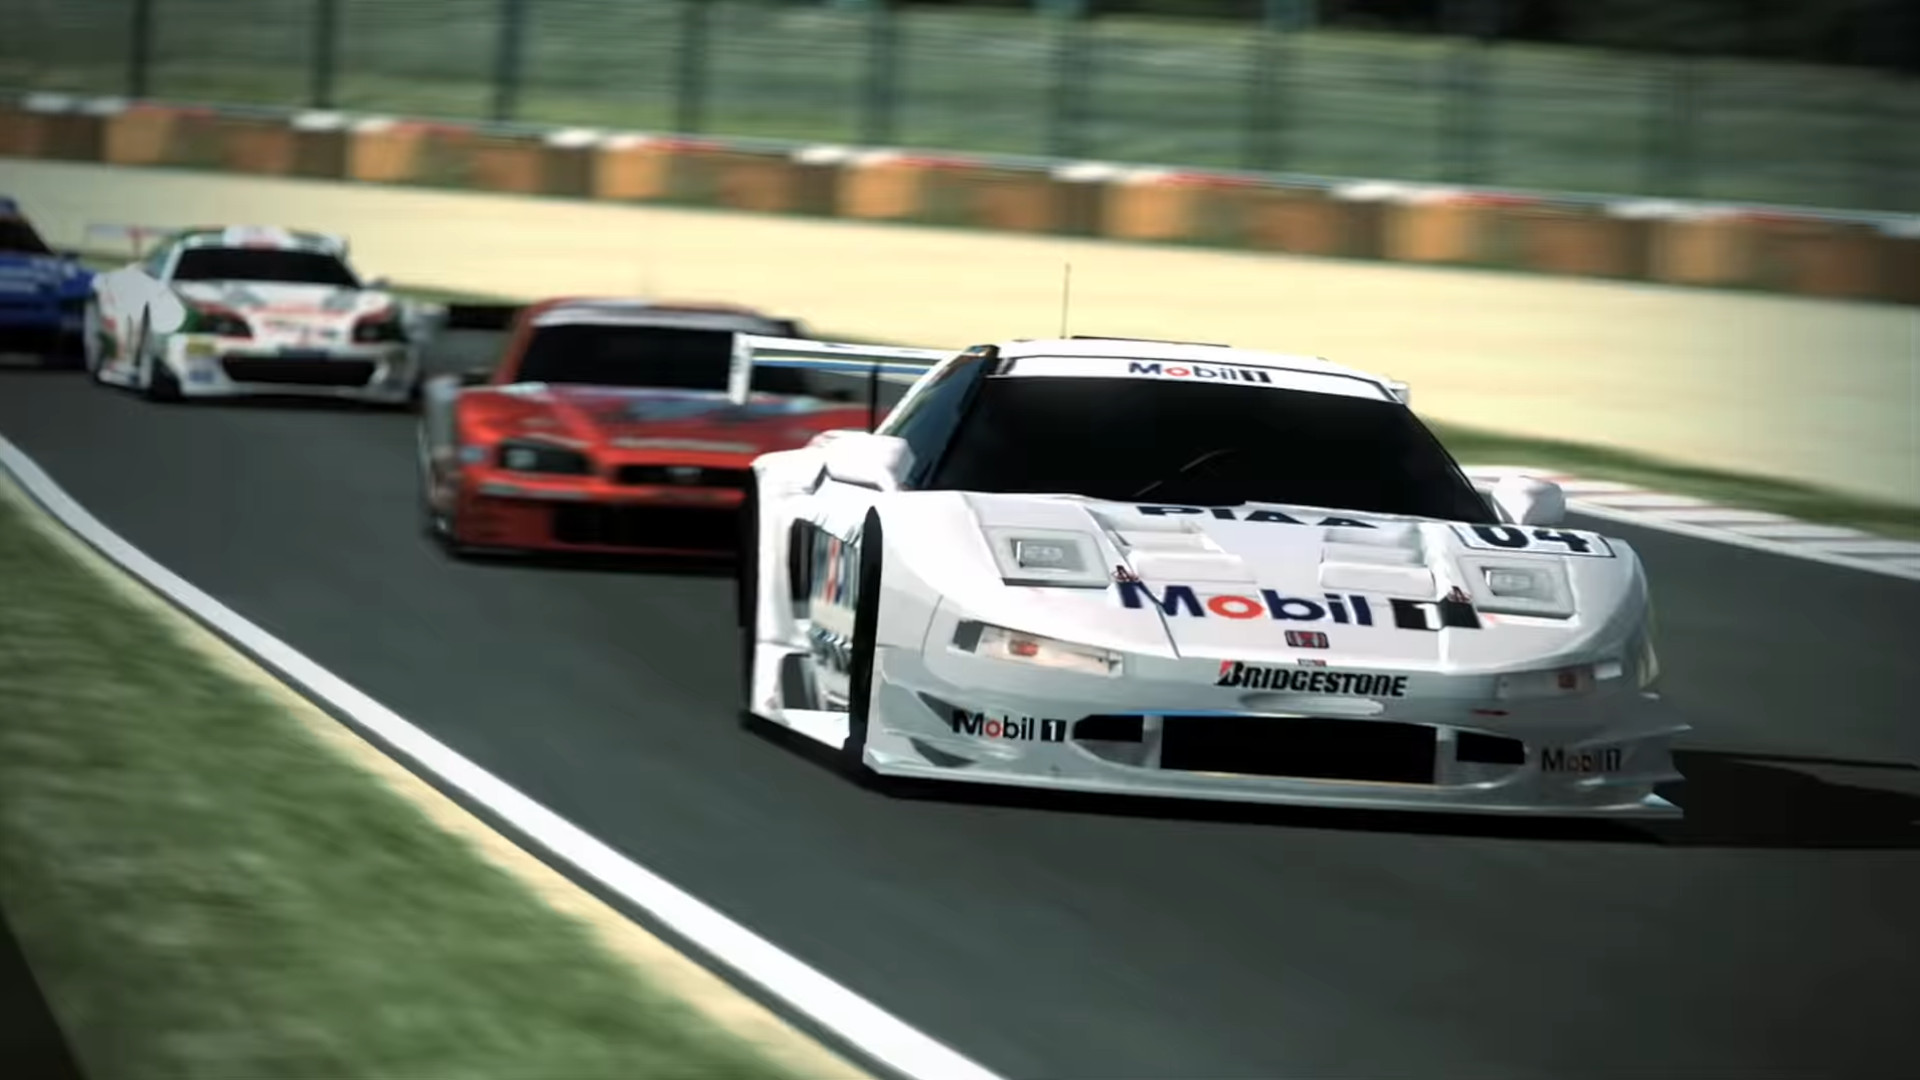 Gran Turismo 7 Cheats & Cheat Codes for PlayStation 5 and